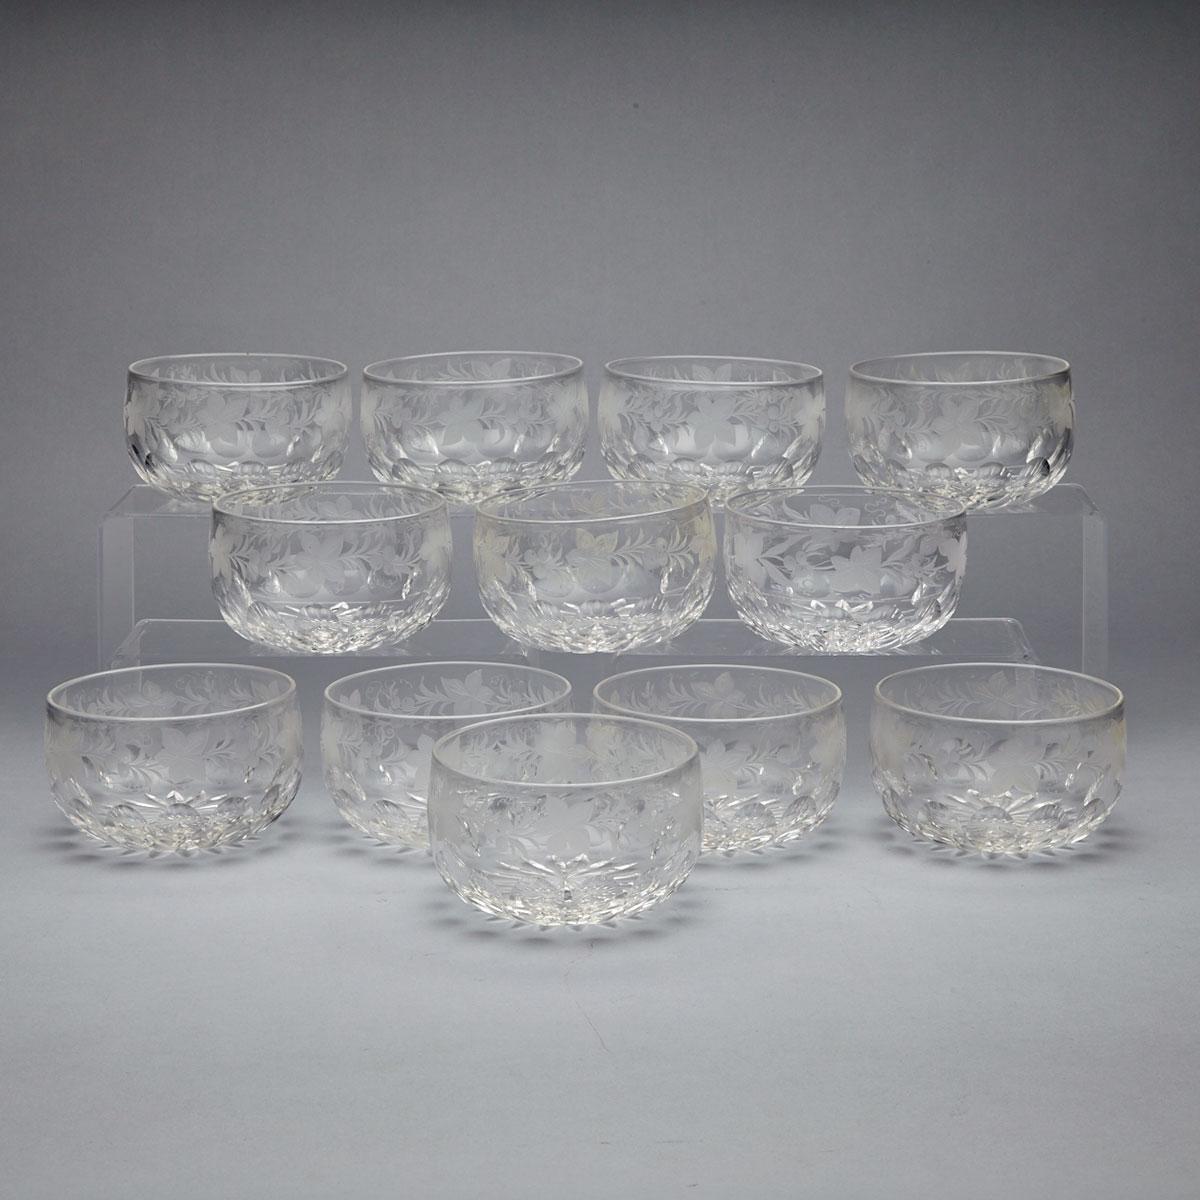 Set of Twelve Victorian Cut and Etched Glass Rinsing Bowls, late 19th century